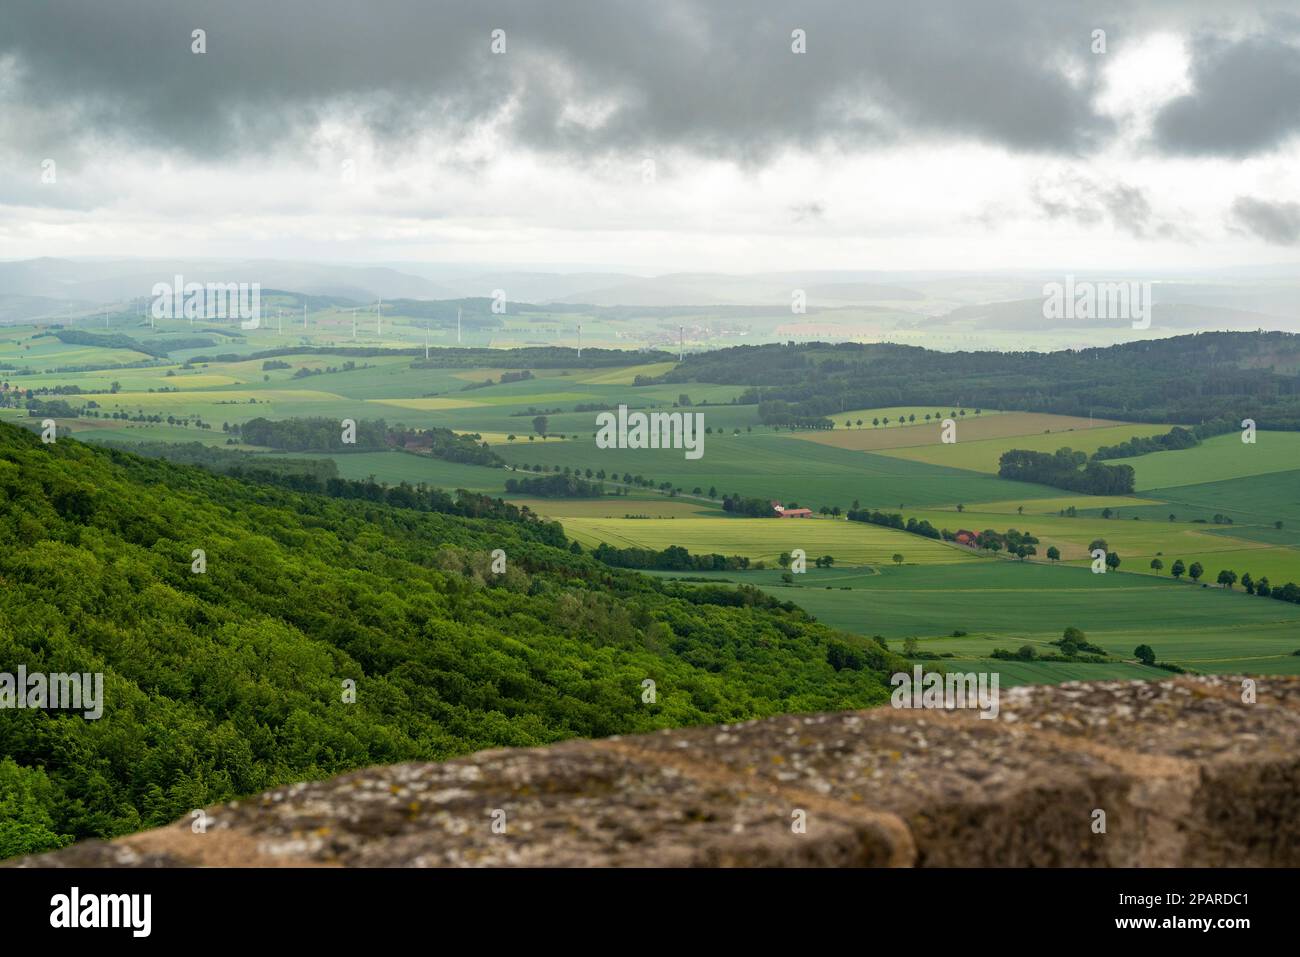 Scenic view from the 'Ithturm' lookout tower on an overcast day, Ith ridge, Weserbergland, Lower Saxony, Germany Stock Photo